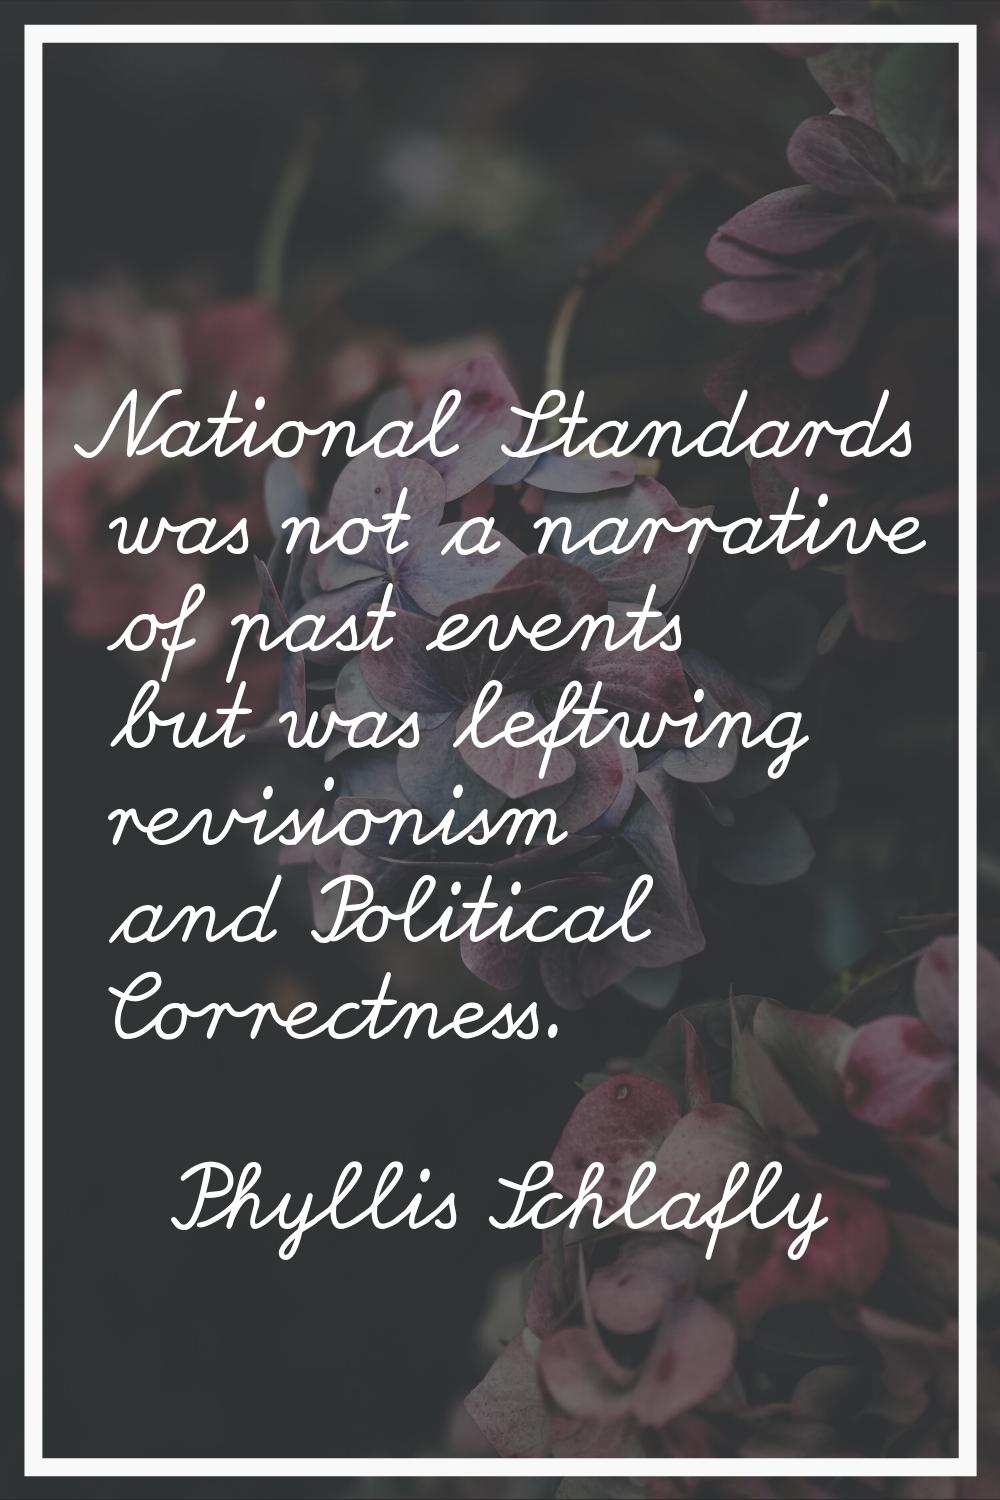 National Standards was not a narrative of past events but was leftwing revisionism and Political Co